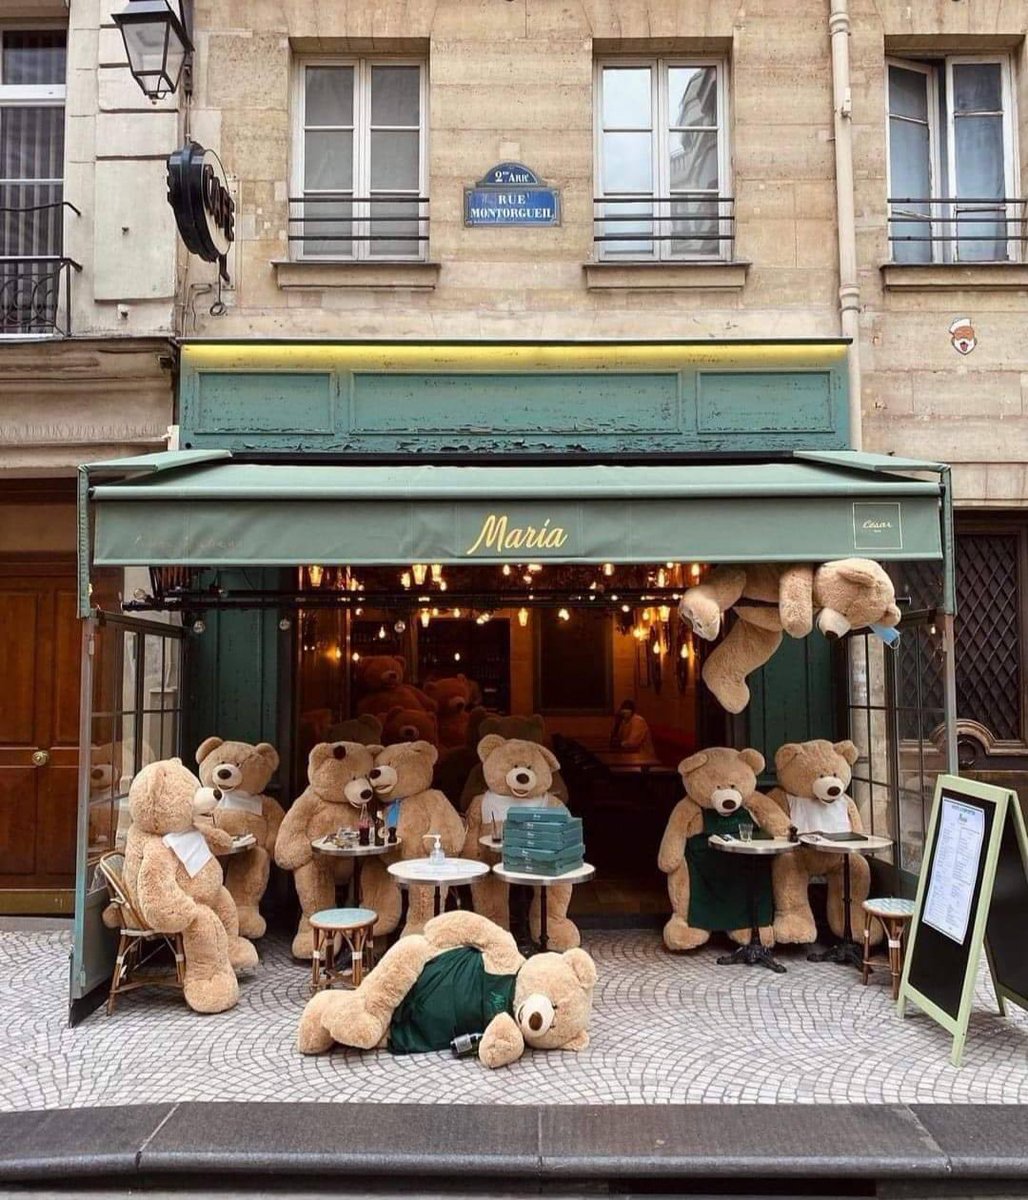 So cool 😎 the cafés in Paris, bears 🐻 sat until people can return on the 19th May ☕️ 🐾🐾 #reopening #confinement3 #Paris #Bears #dogsoftwitter #dogs